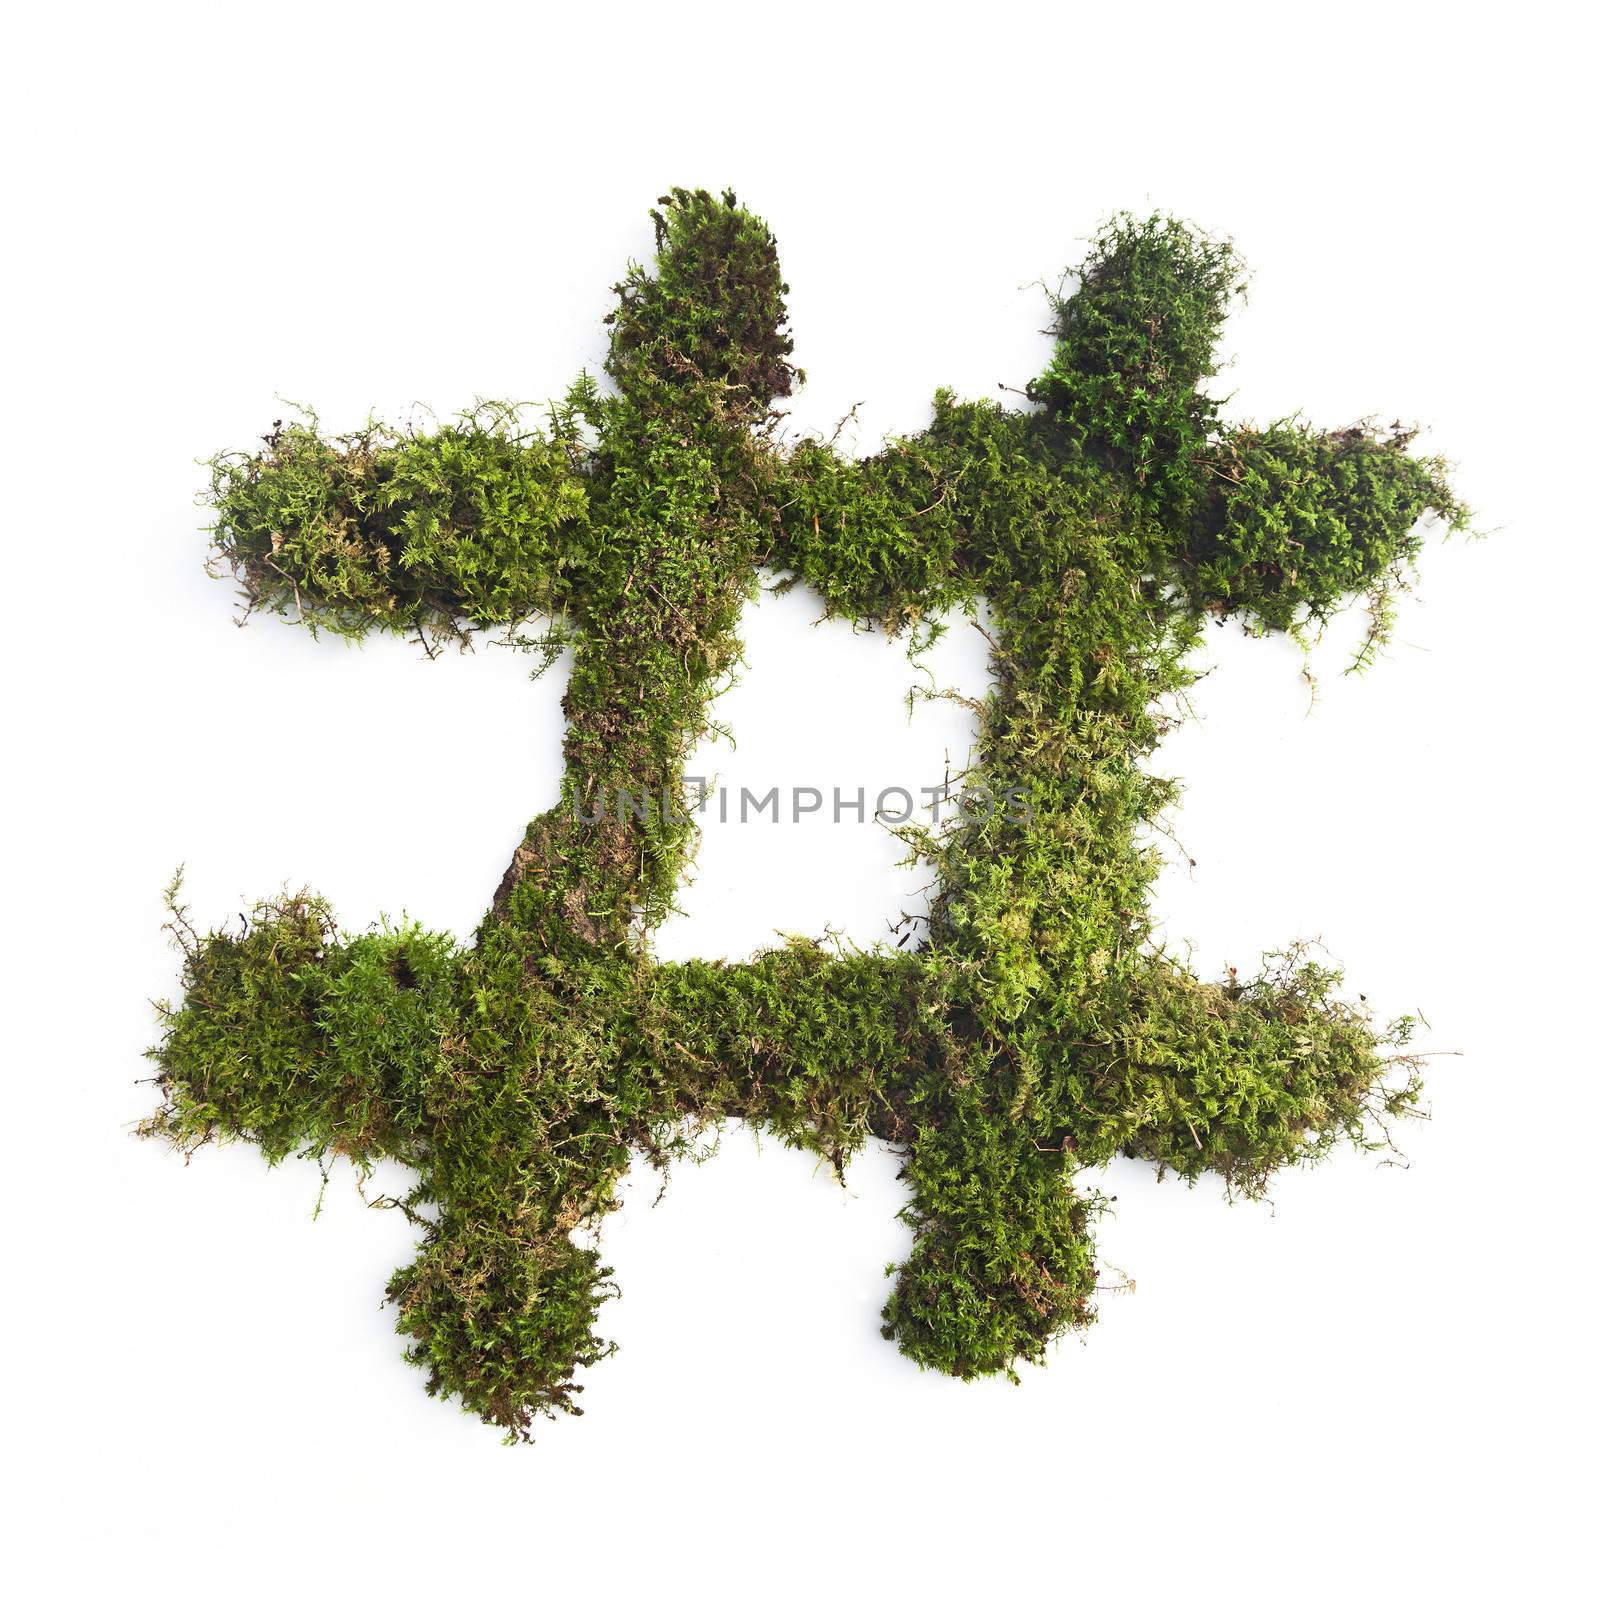 a hashtag symbol made of moss.